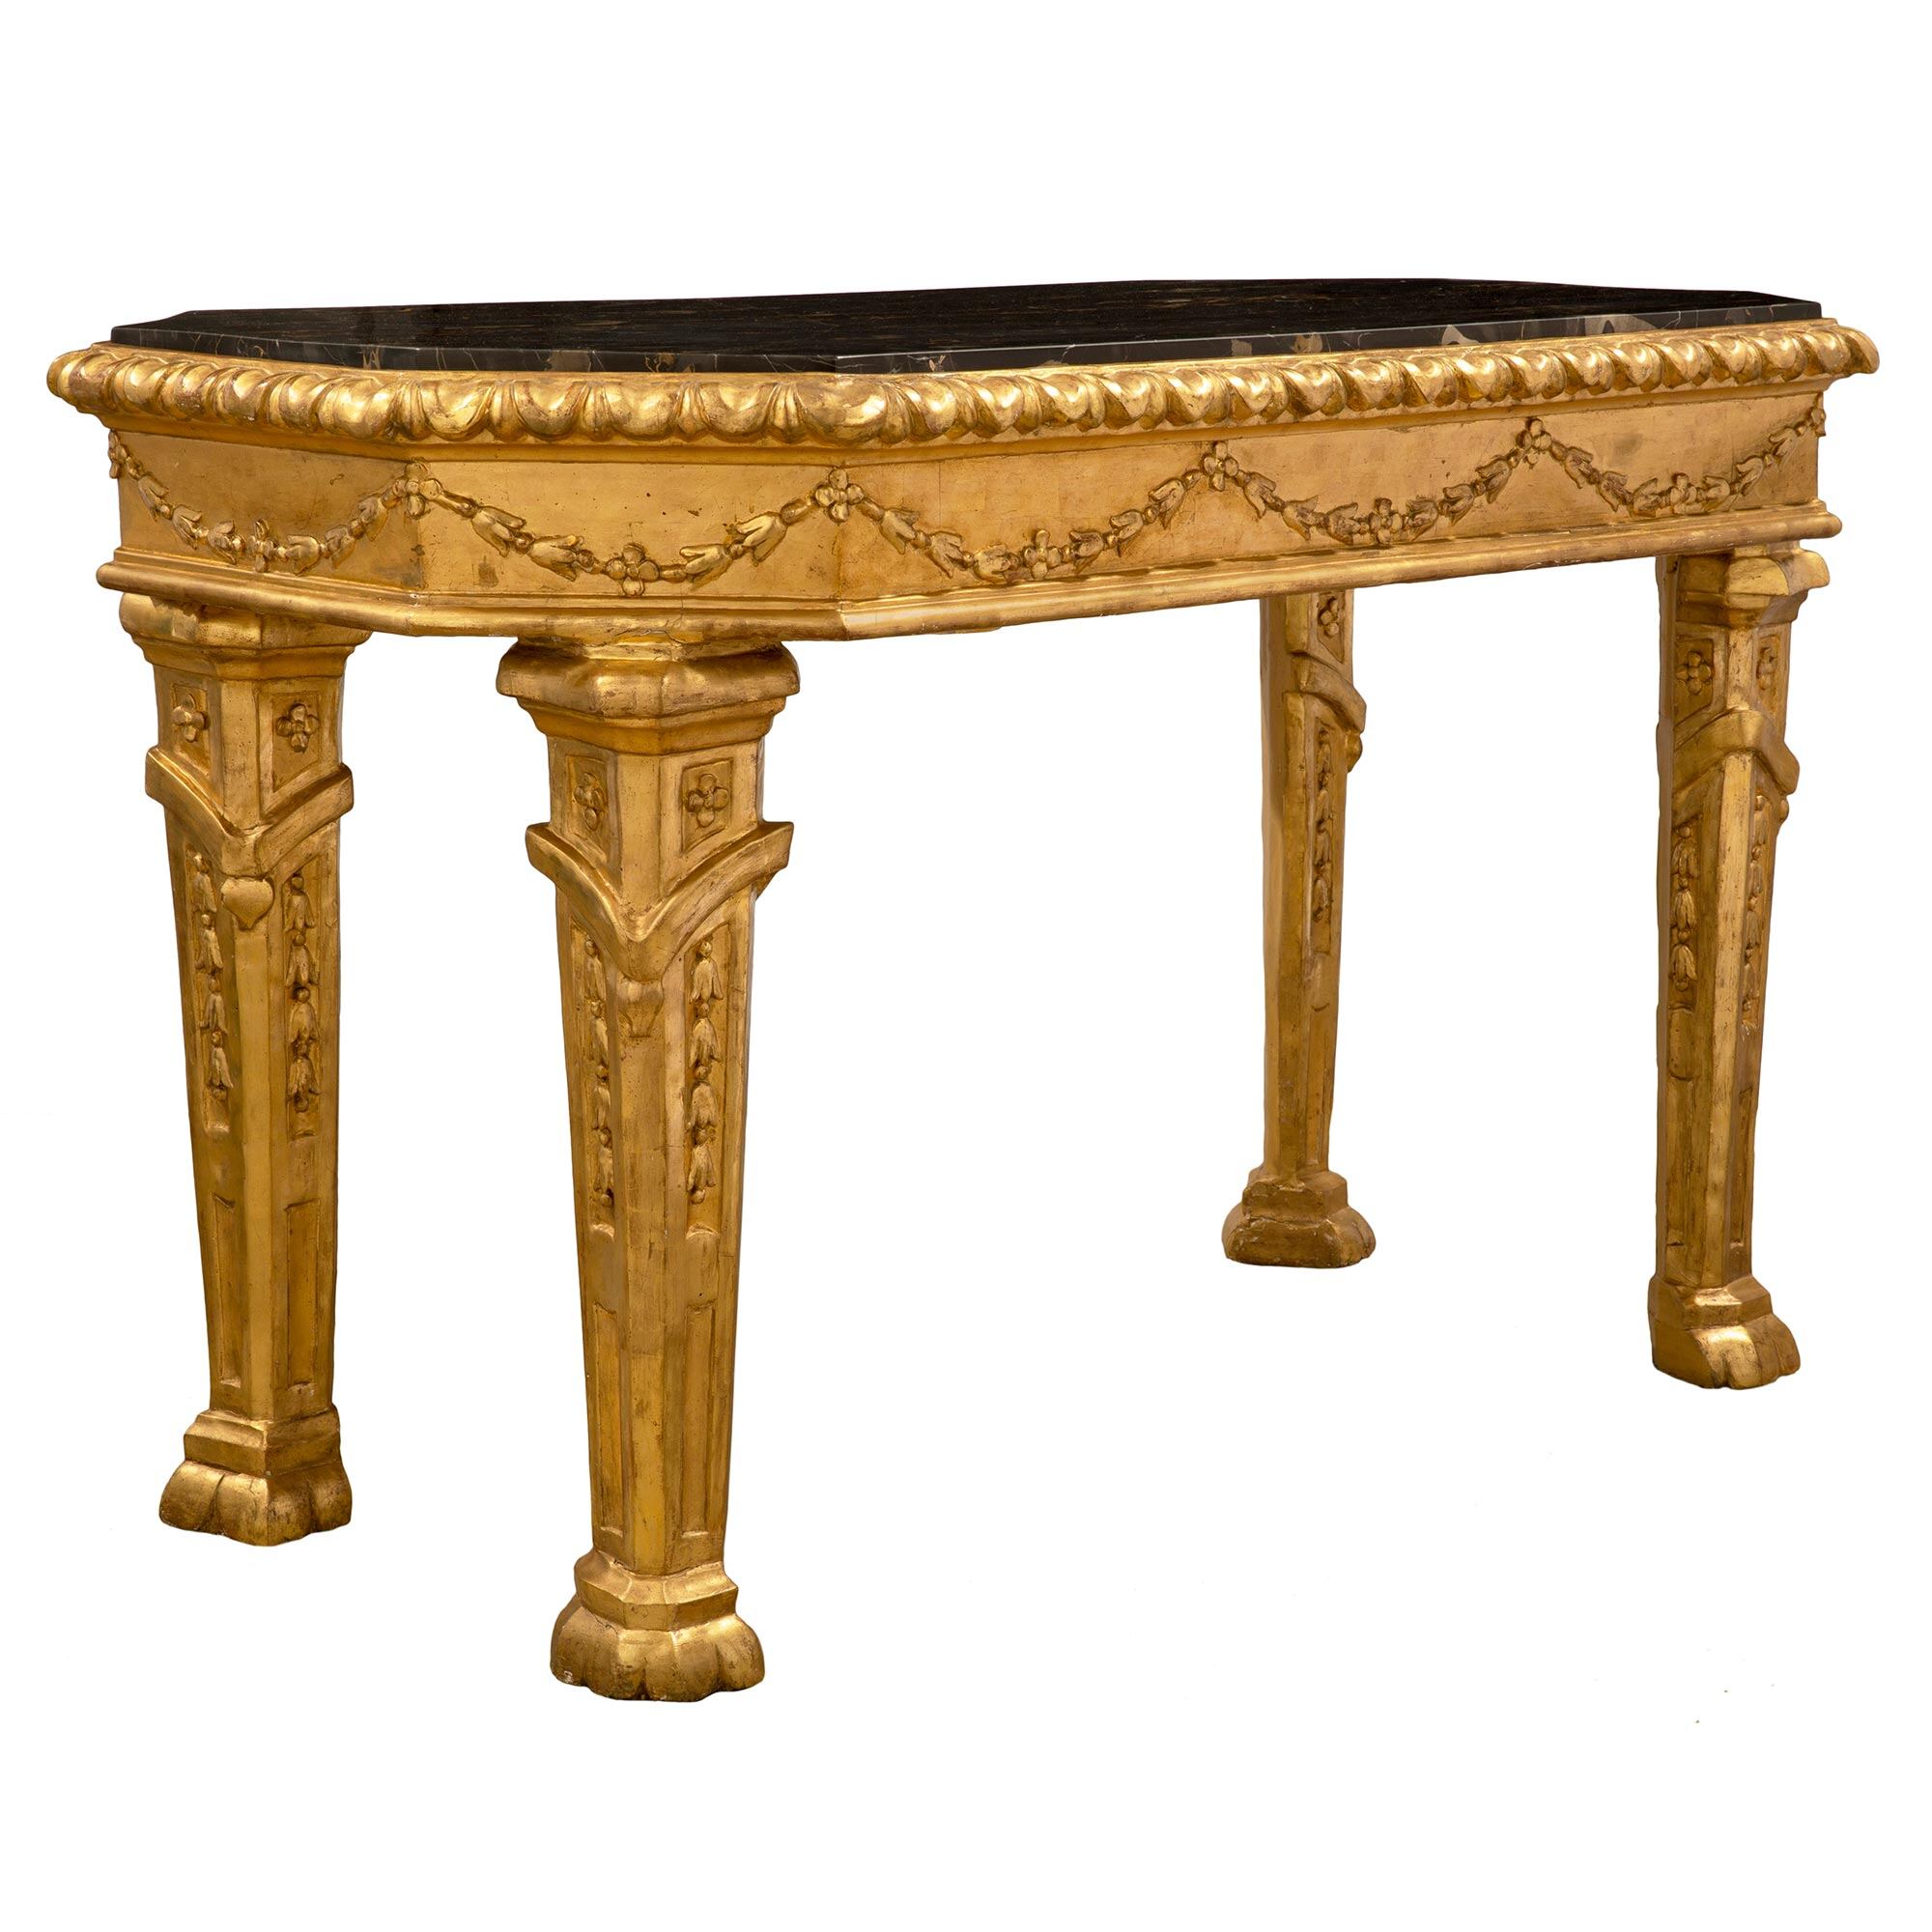 Louis XIV-Style Giltwood Octagonal Table